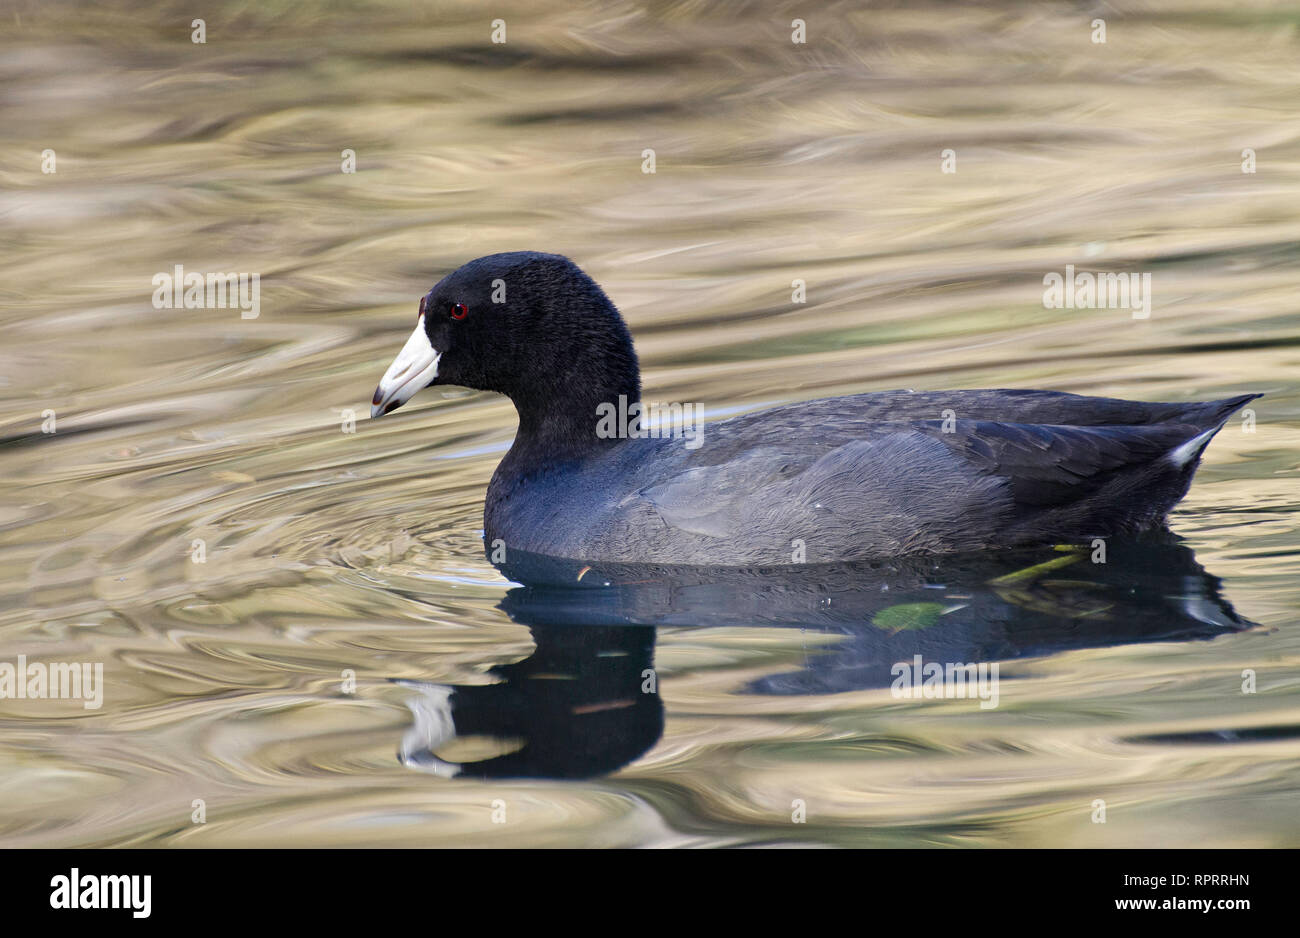 An American Coot (Fulica americana) swims in aFranklin Canyon pond, Los Angeles, CA, USA. Stock Photo